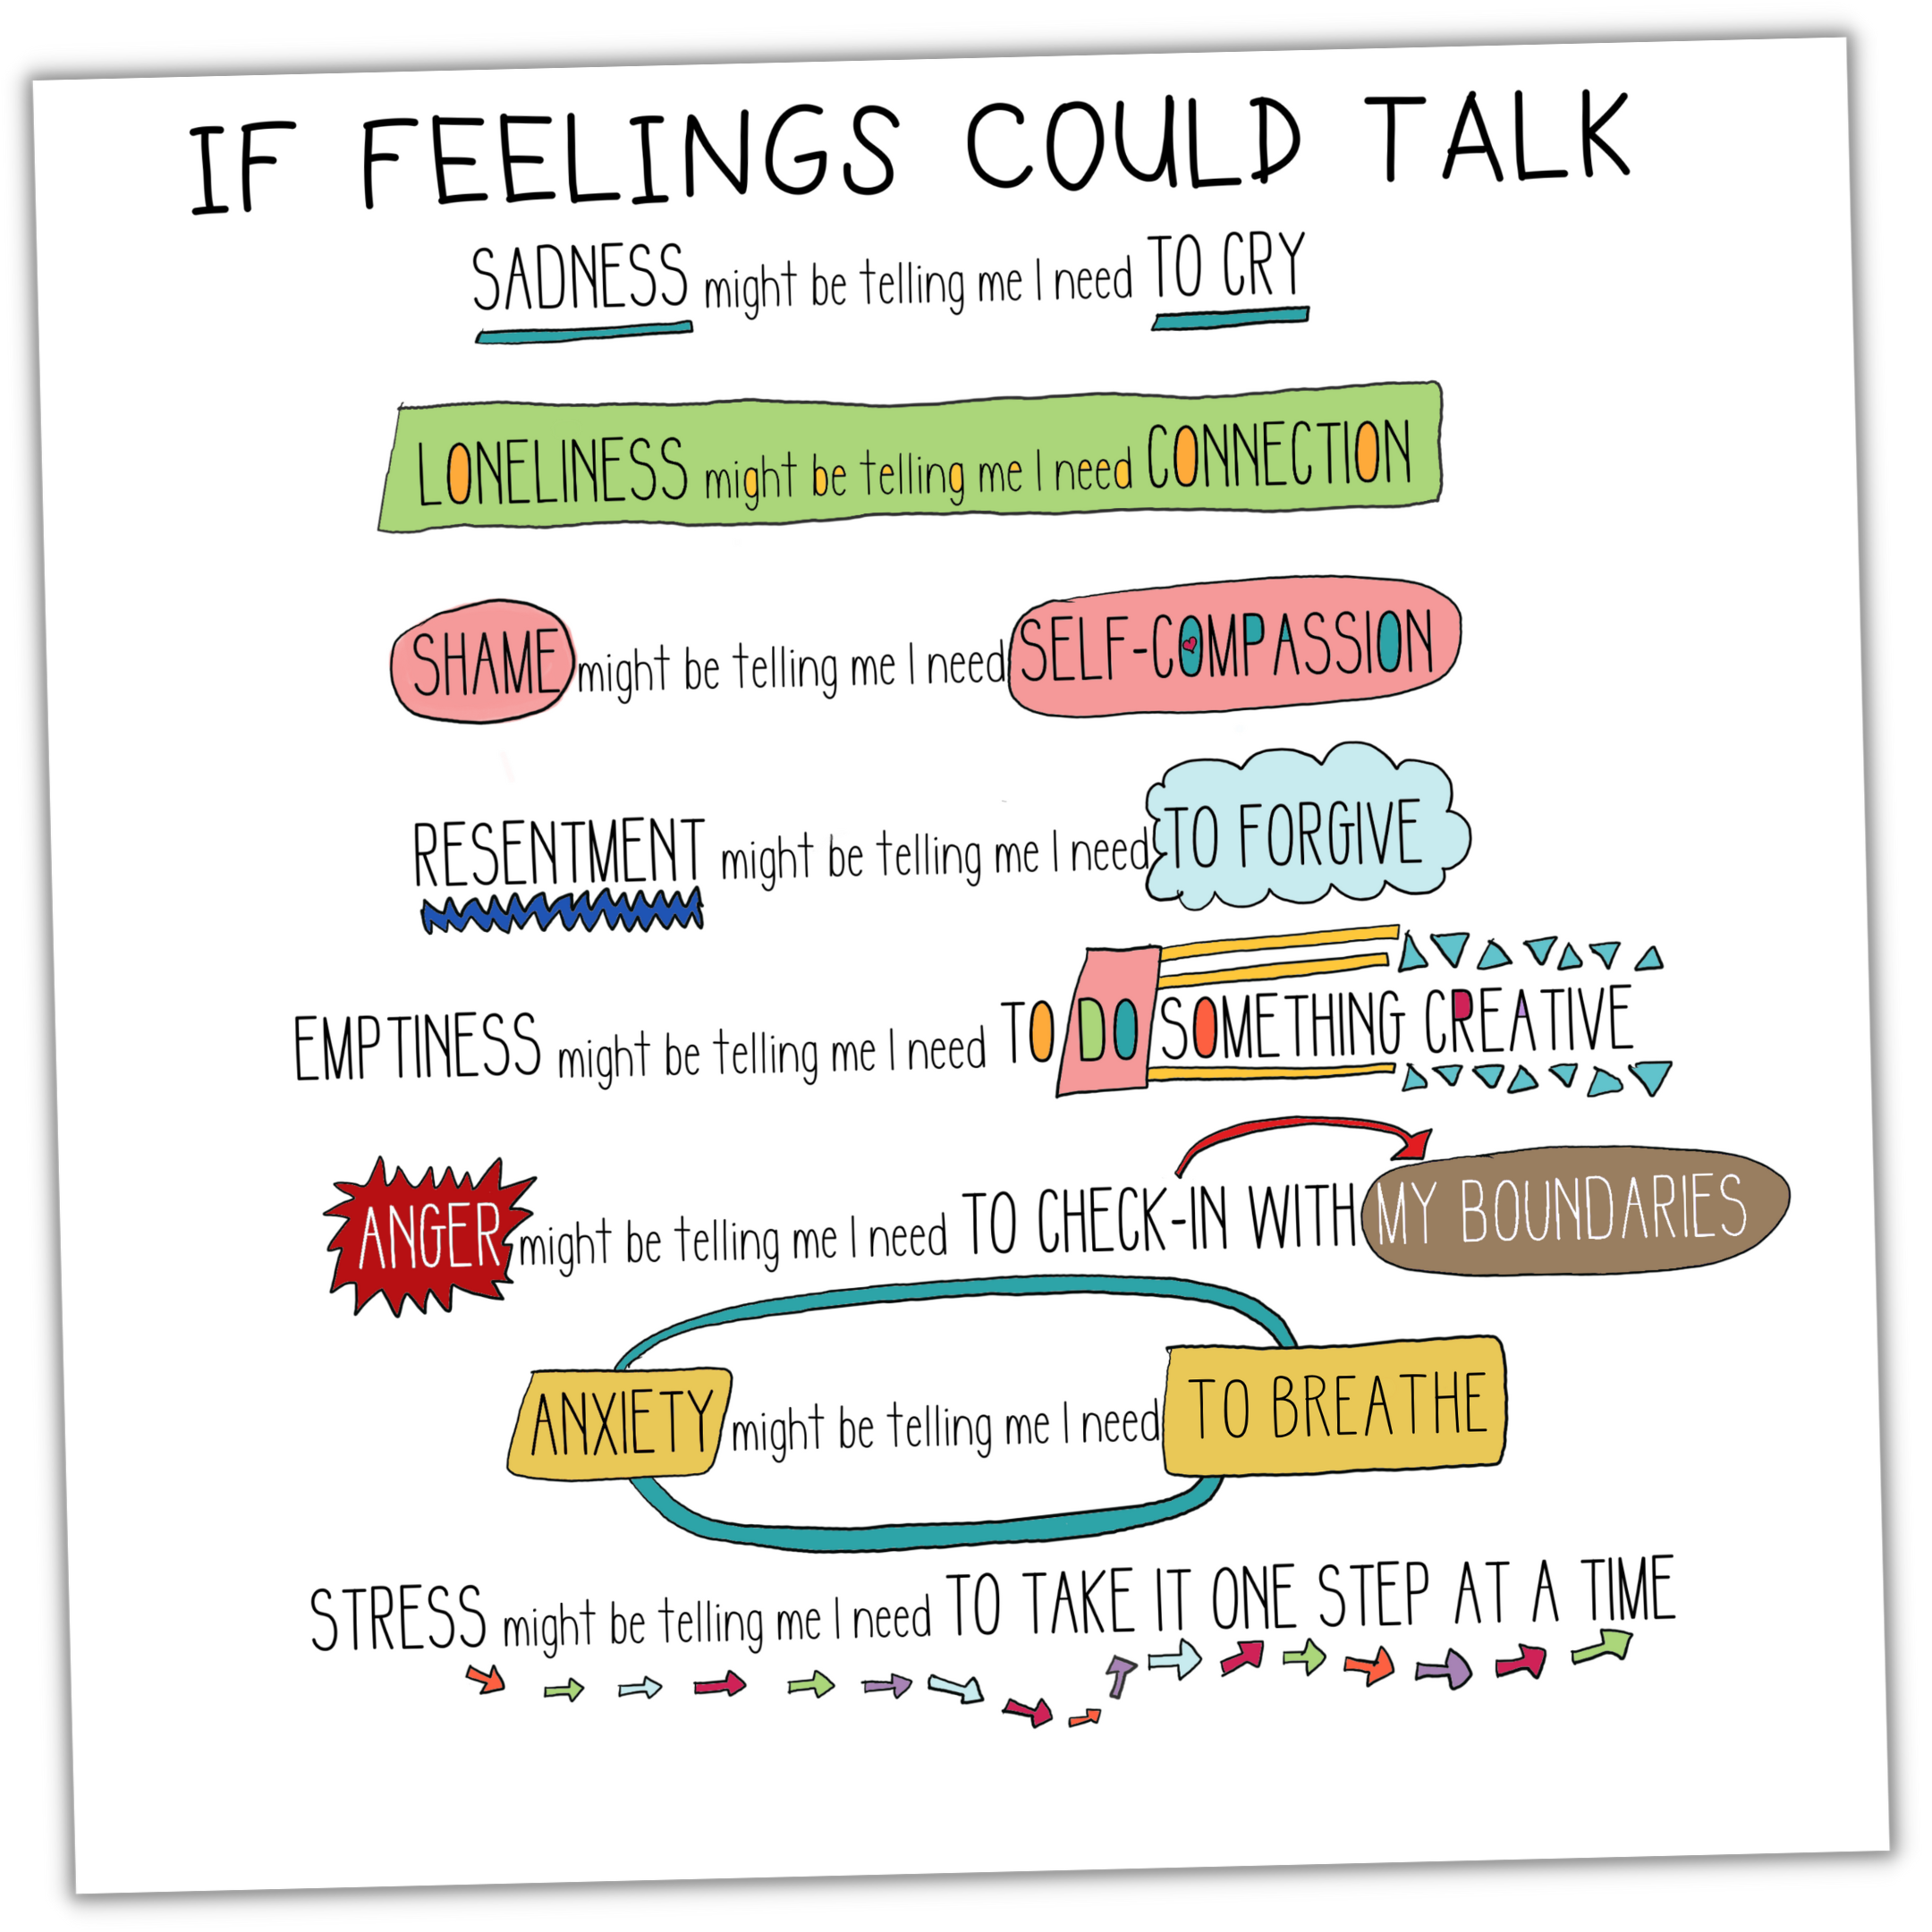 If Feelings Could Talk Free Poster